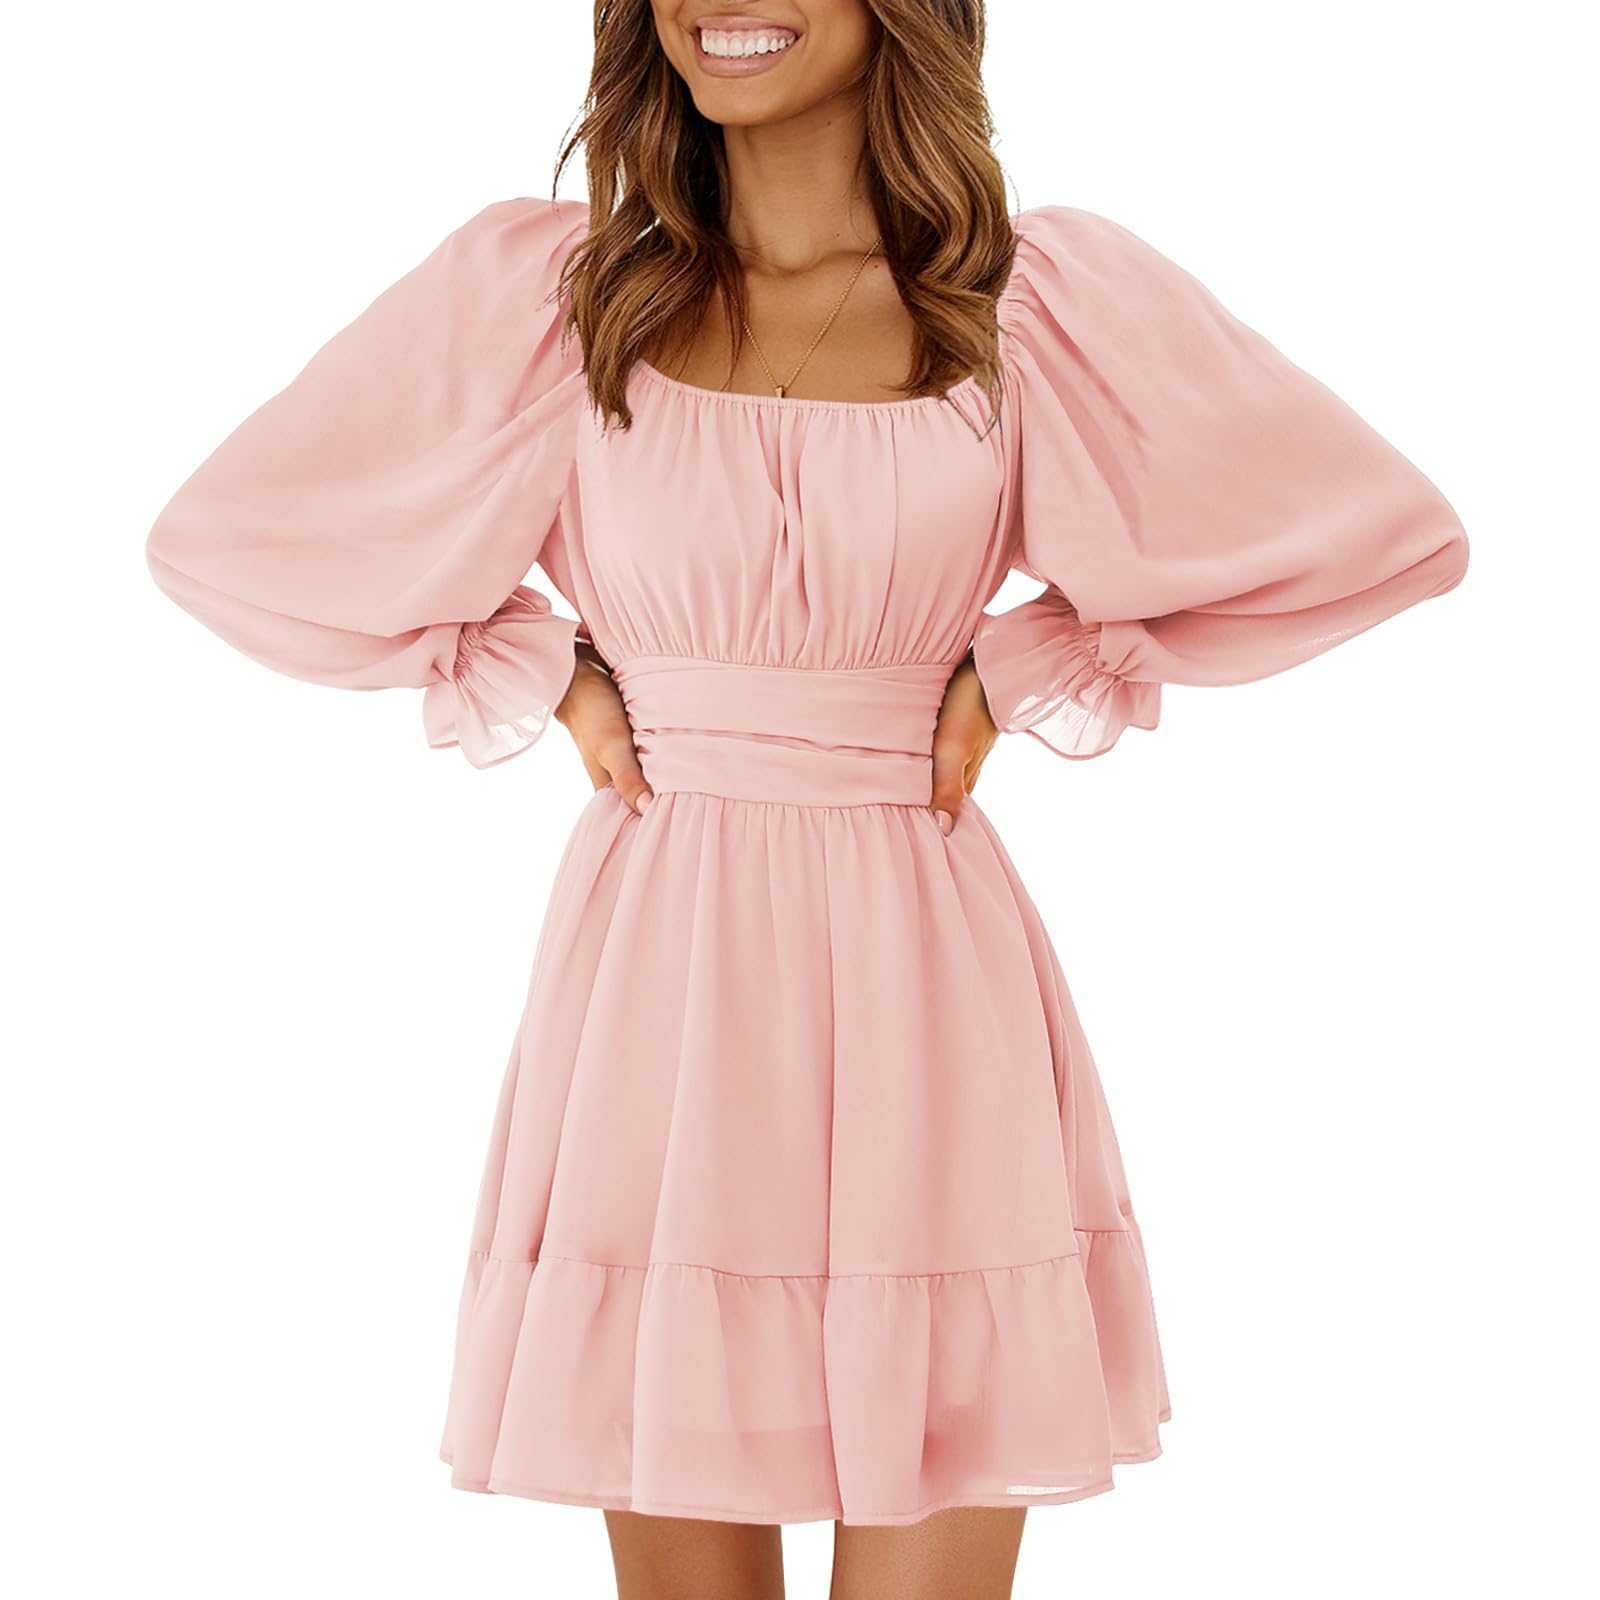 Easter dresses under $50 on Amazon